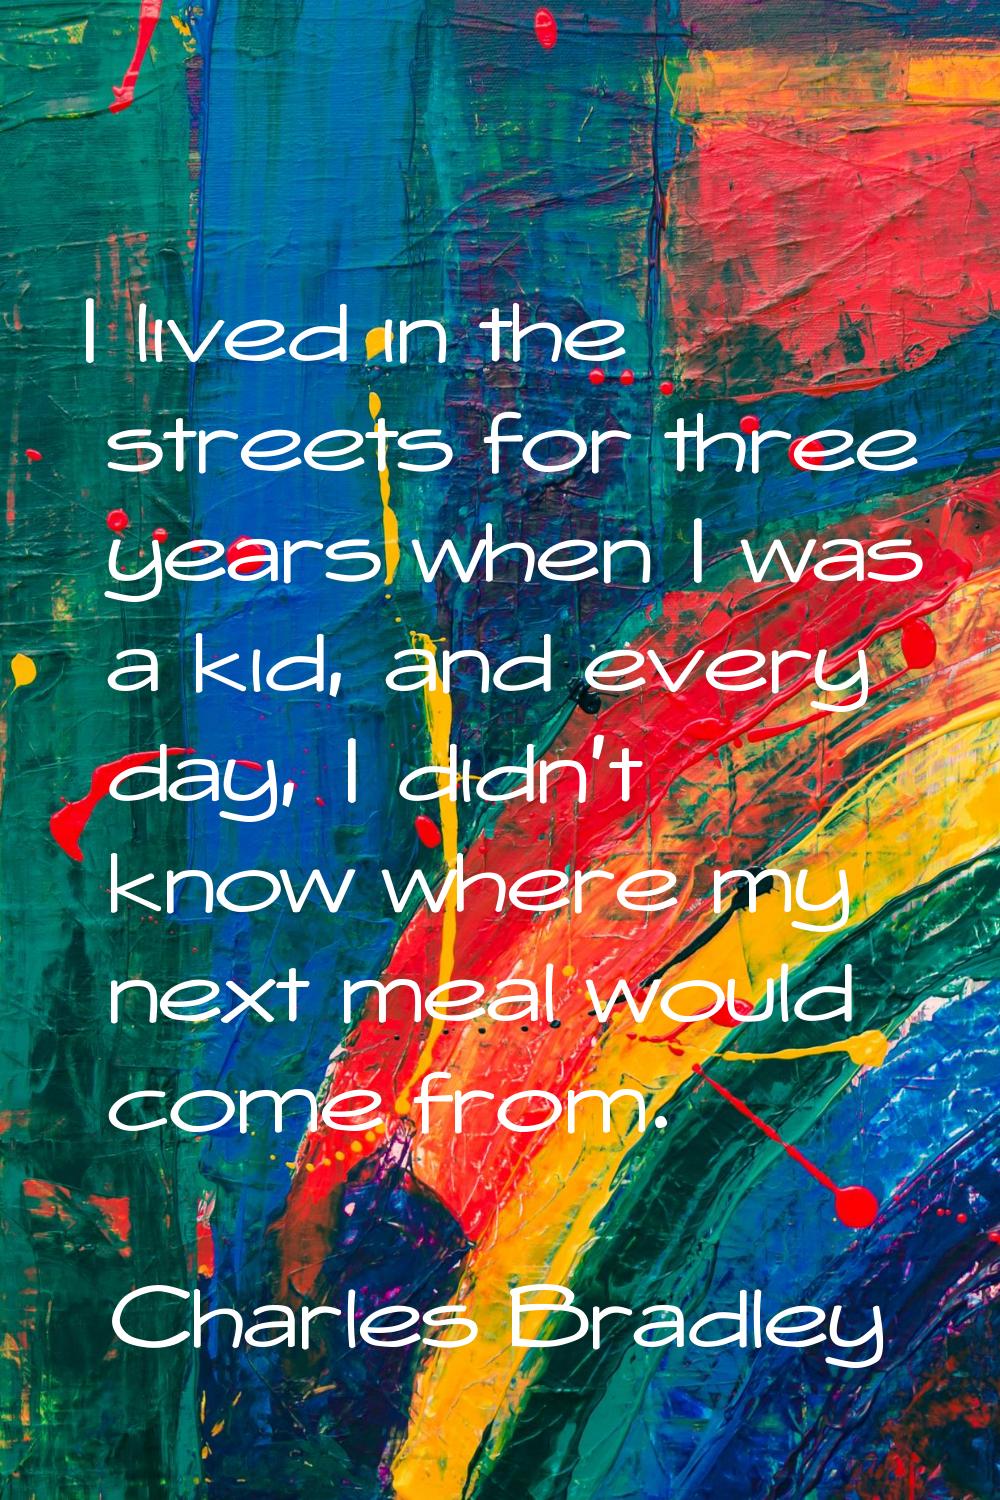 I lived in the streets for three years when I was a kid, and every day, I didn't know where my next